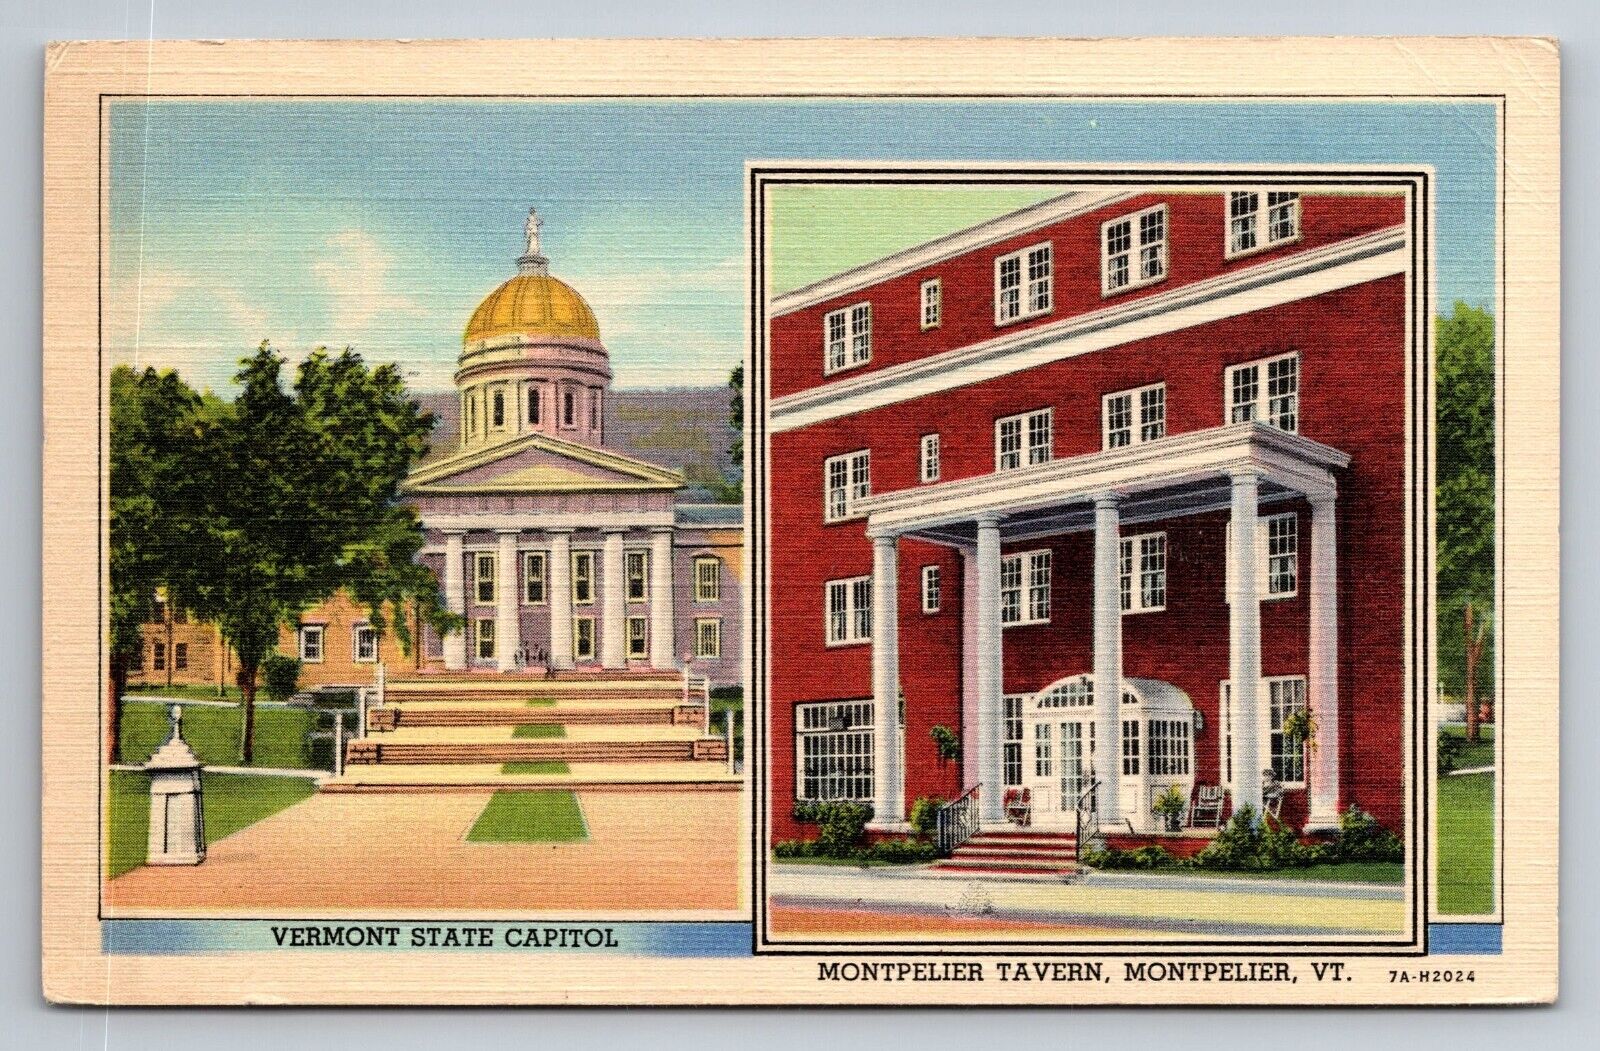 Vermont State Capitol & Montpelier Tavern Vintage Linen Posted 1946 Postcard